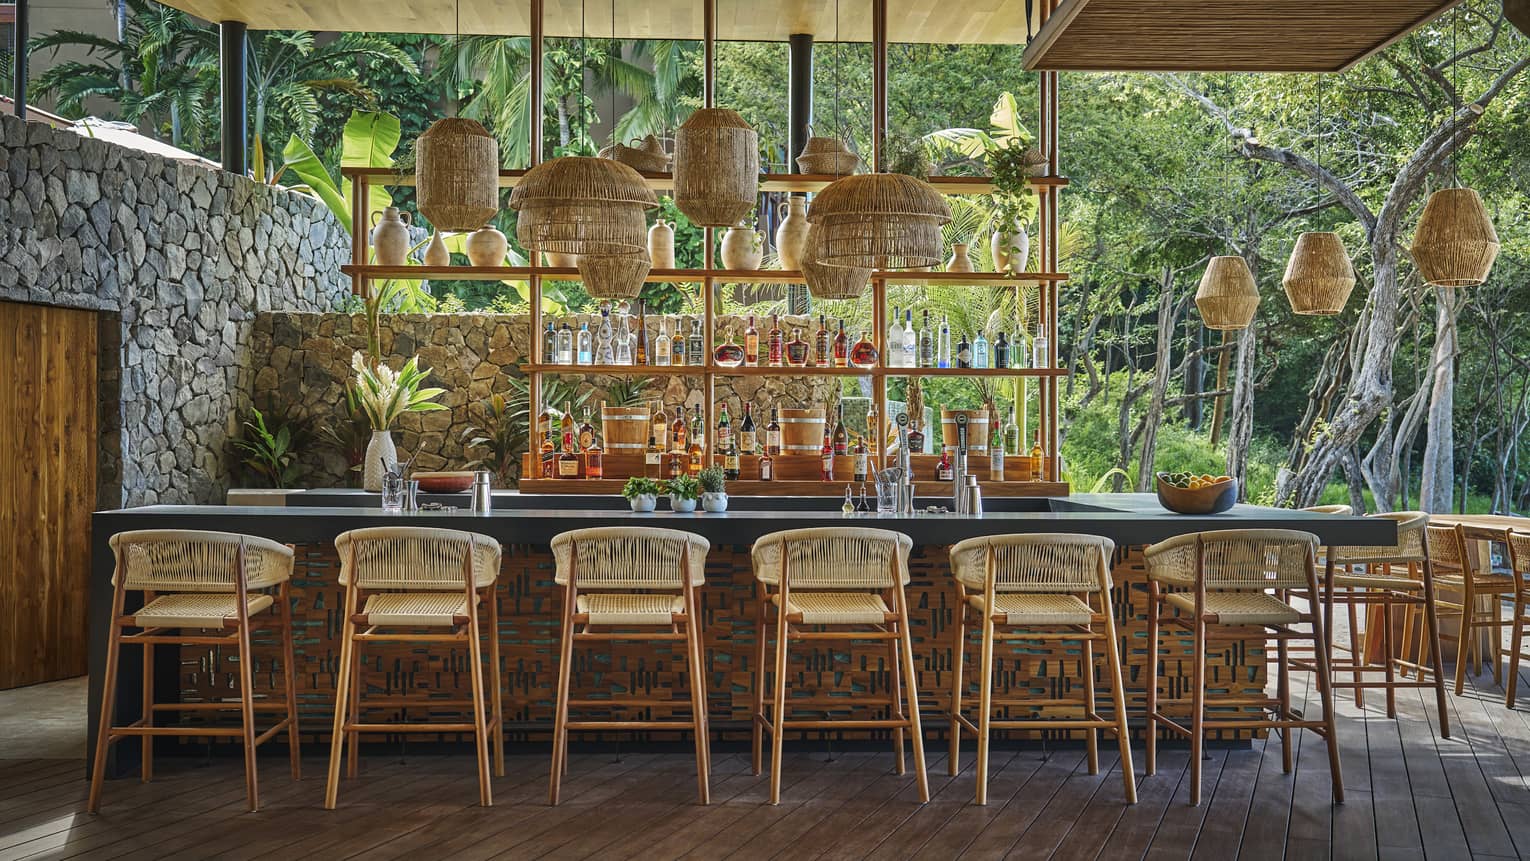 Interior bar of restaurant with rattan stools and a wall of beverages